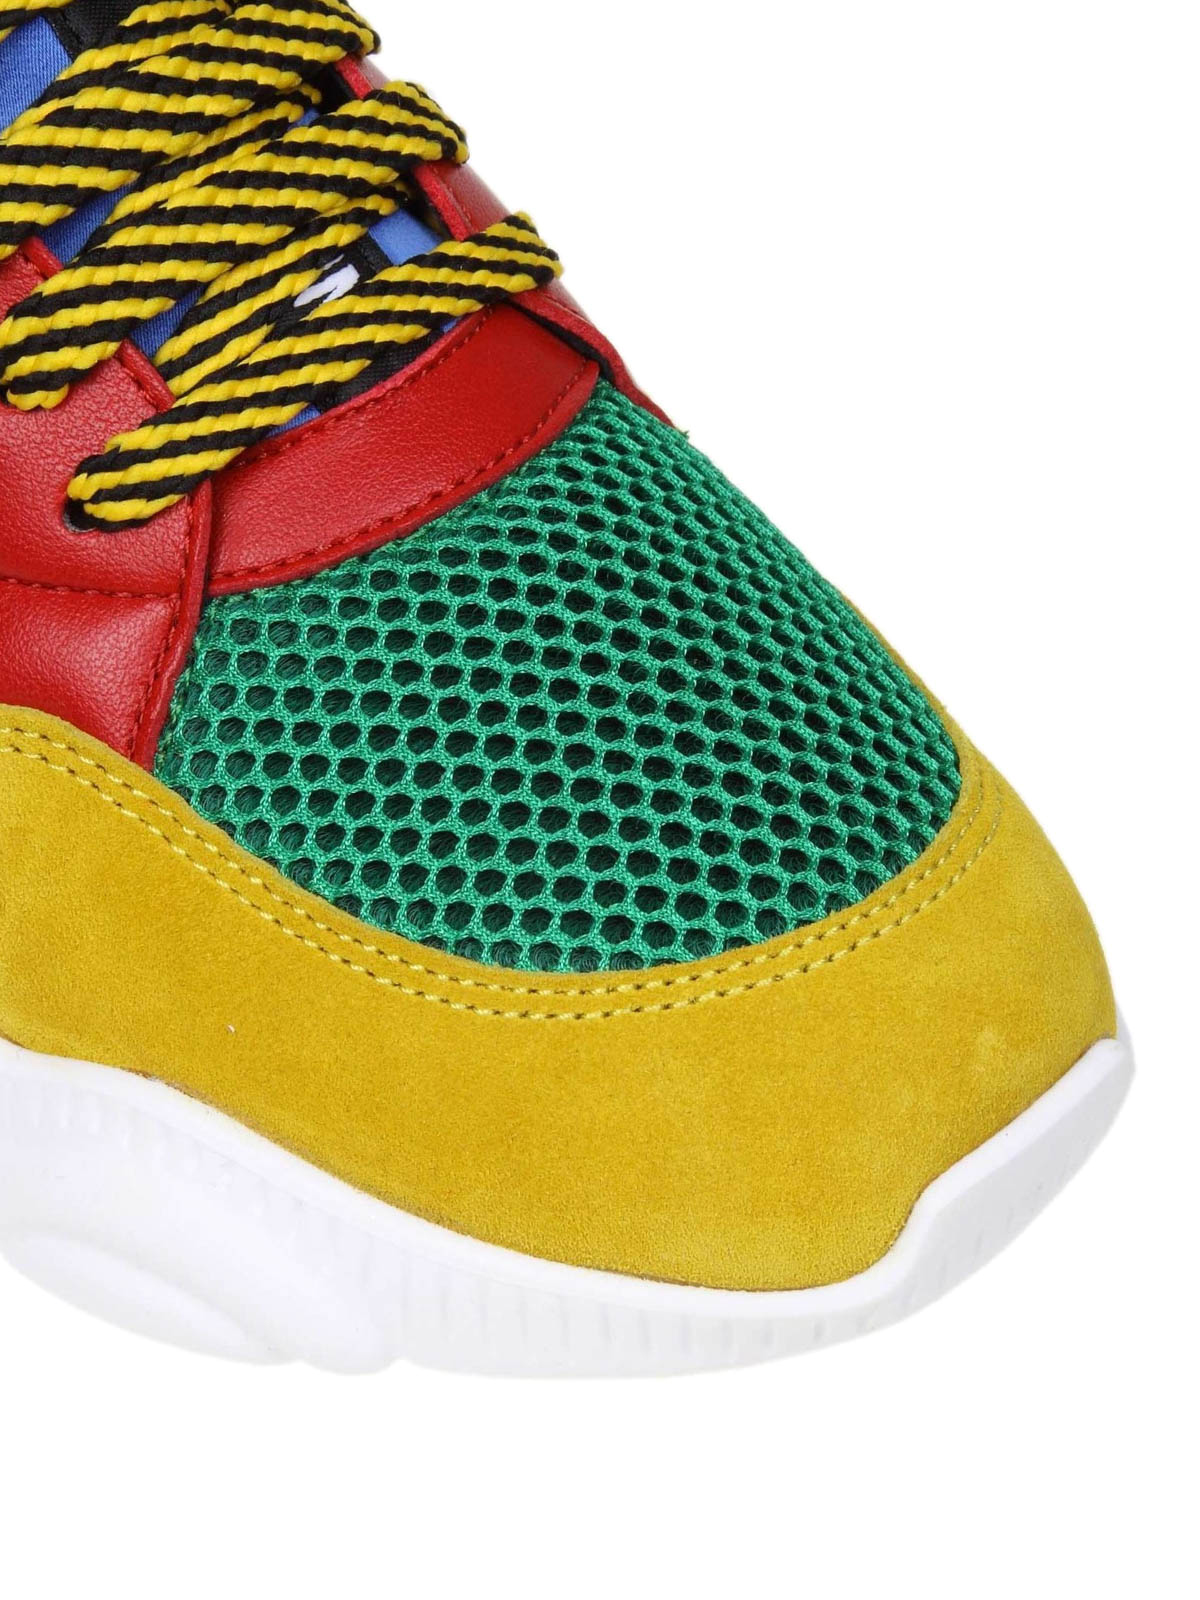 Trainers Moschino - Teddy Bear sole multicolour sneakers 